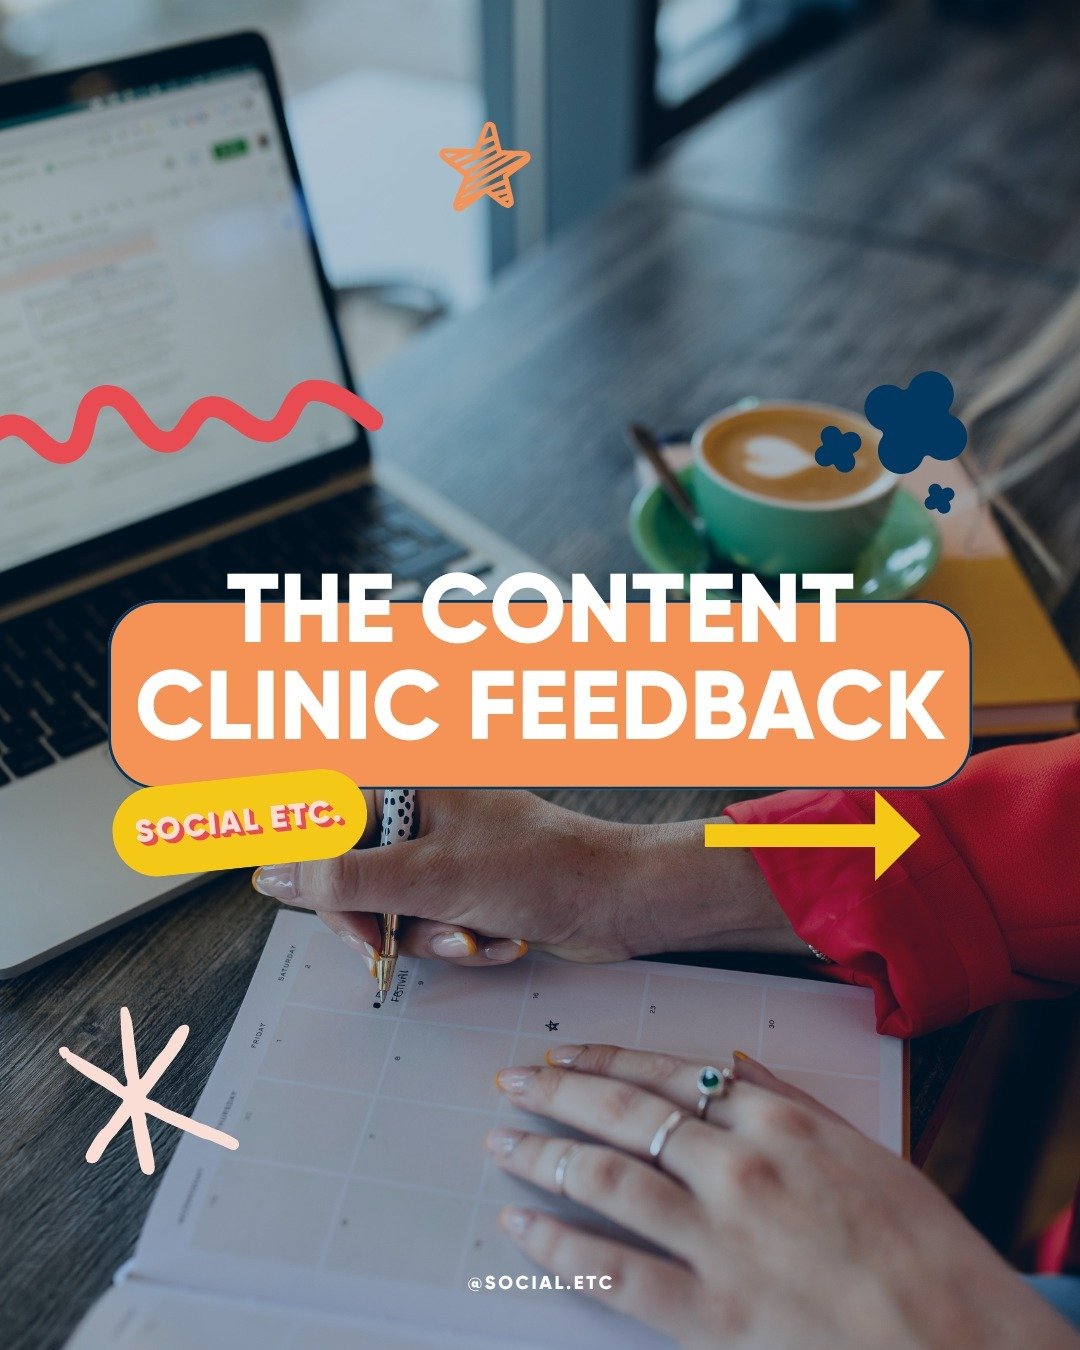 SWIPE for incredible client feedback ➡️ This is what The Content Clinic members had to say ➡️

Why do my members love The Content Clinic? 🧡

- They go away feeling INSPIRED
- It provides accountability for them to create high-impact content
- They g